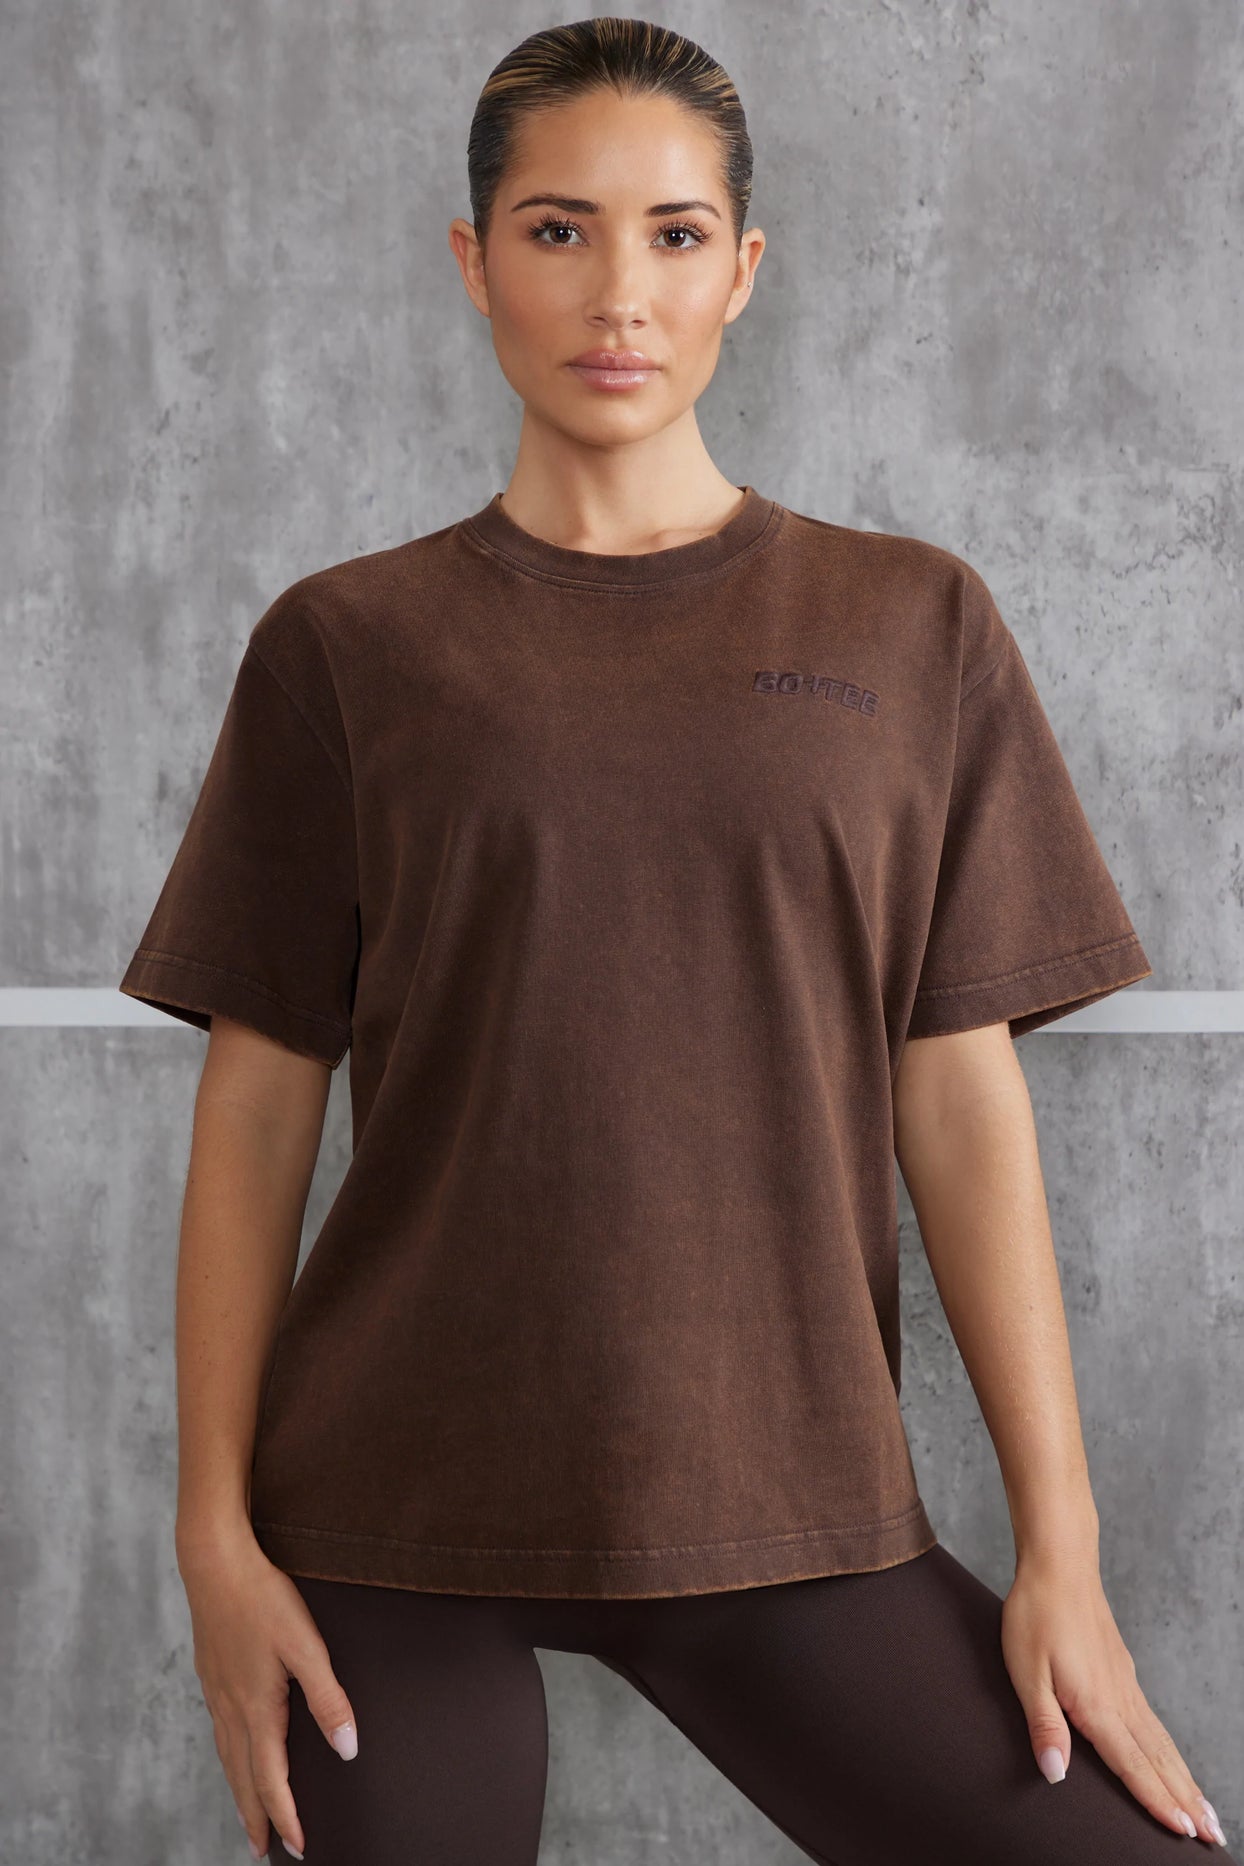 Oversized T-Shirt in Brown